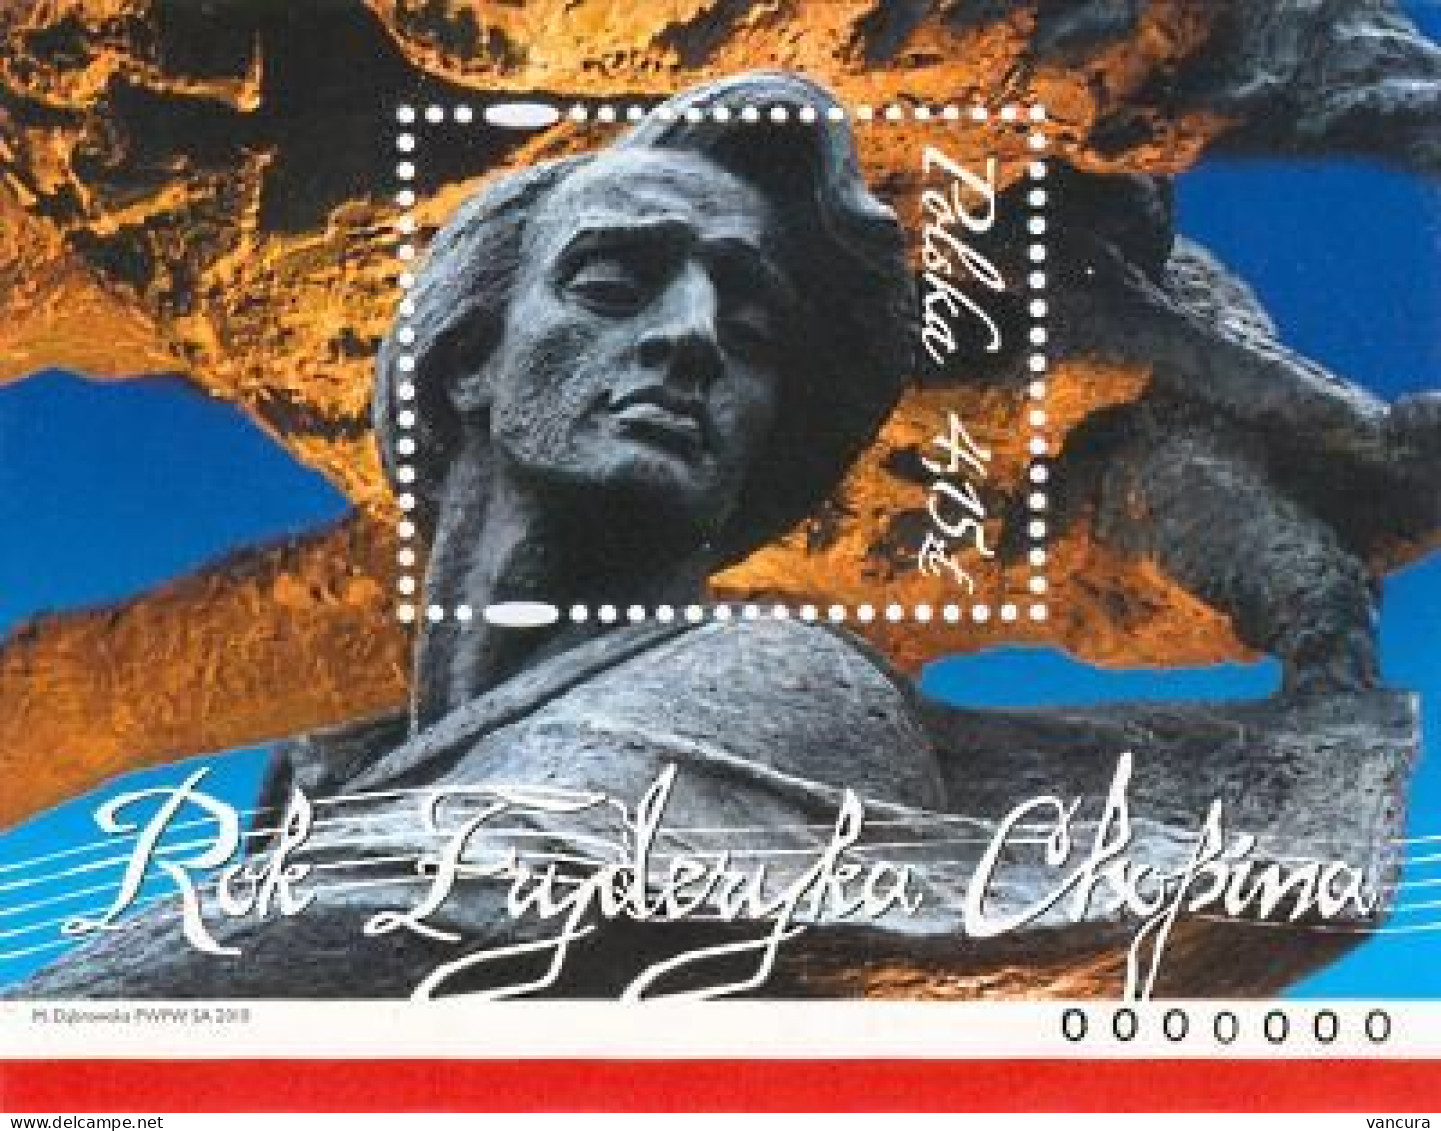 ** Bl. 156 Poland Chopin Anniversary 2010 THE NUMBER OF THE SHEET IS DIFFERENT!!! - Musique